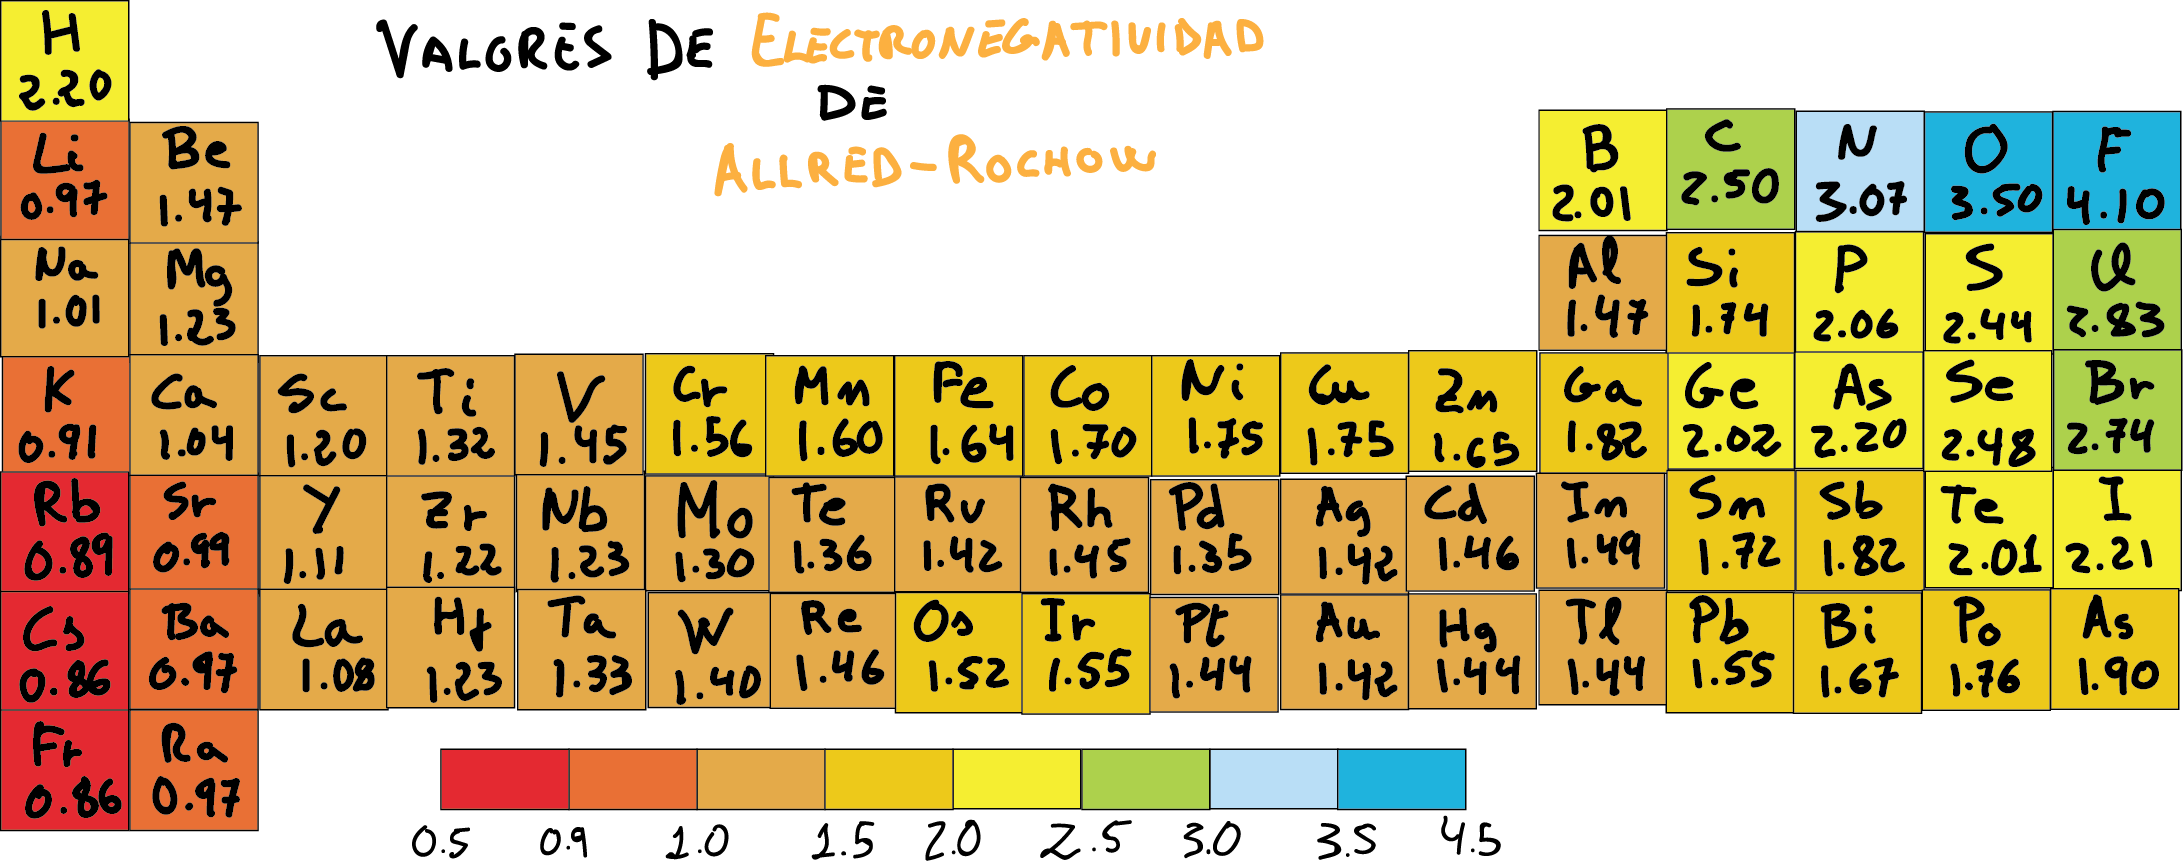 Allred-Rochow's electronegativity coefficients in the Periodic Table - electronegativity chart